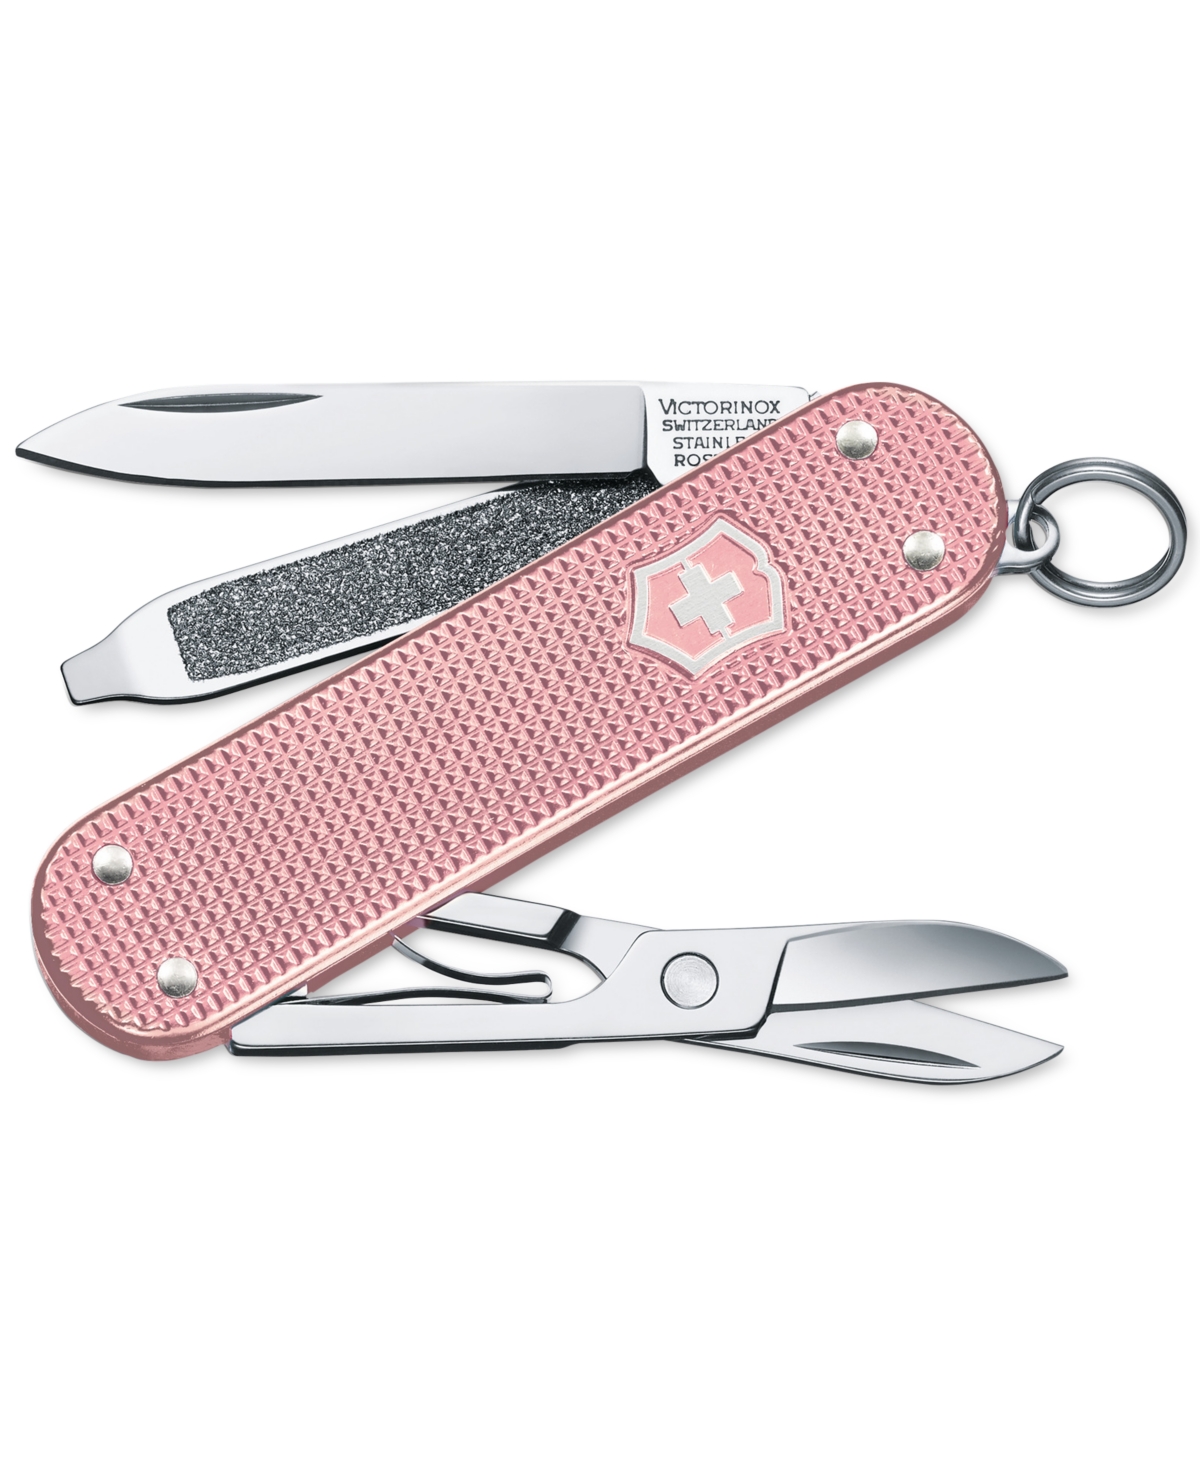 Swiss Army Classic Sd Alox Pocketknife, Cotton Candy - Cotton Candy